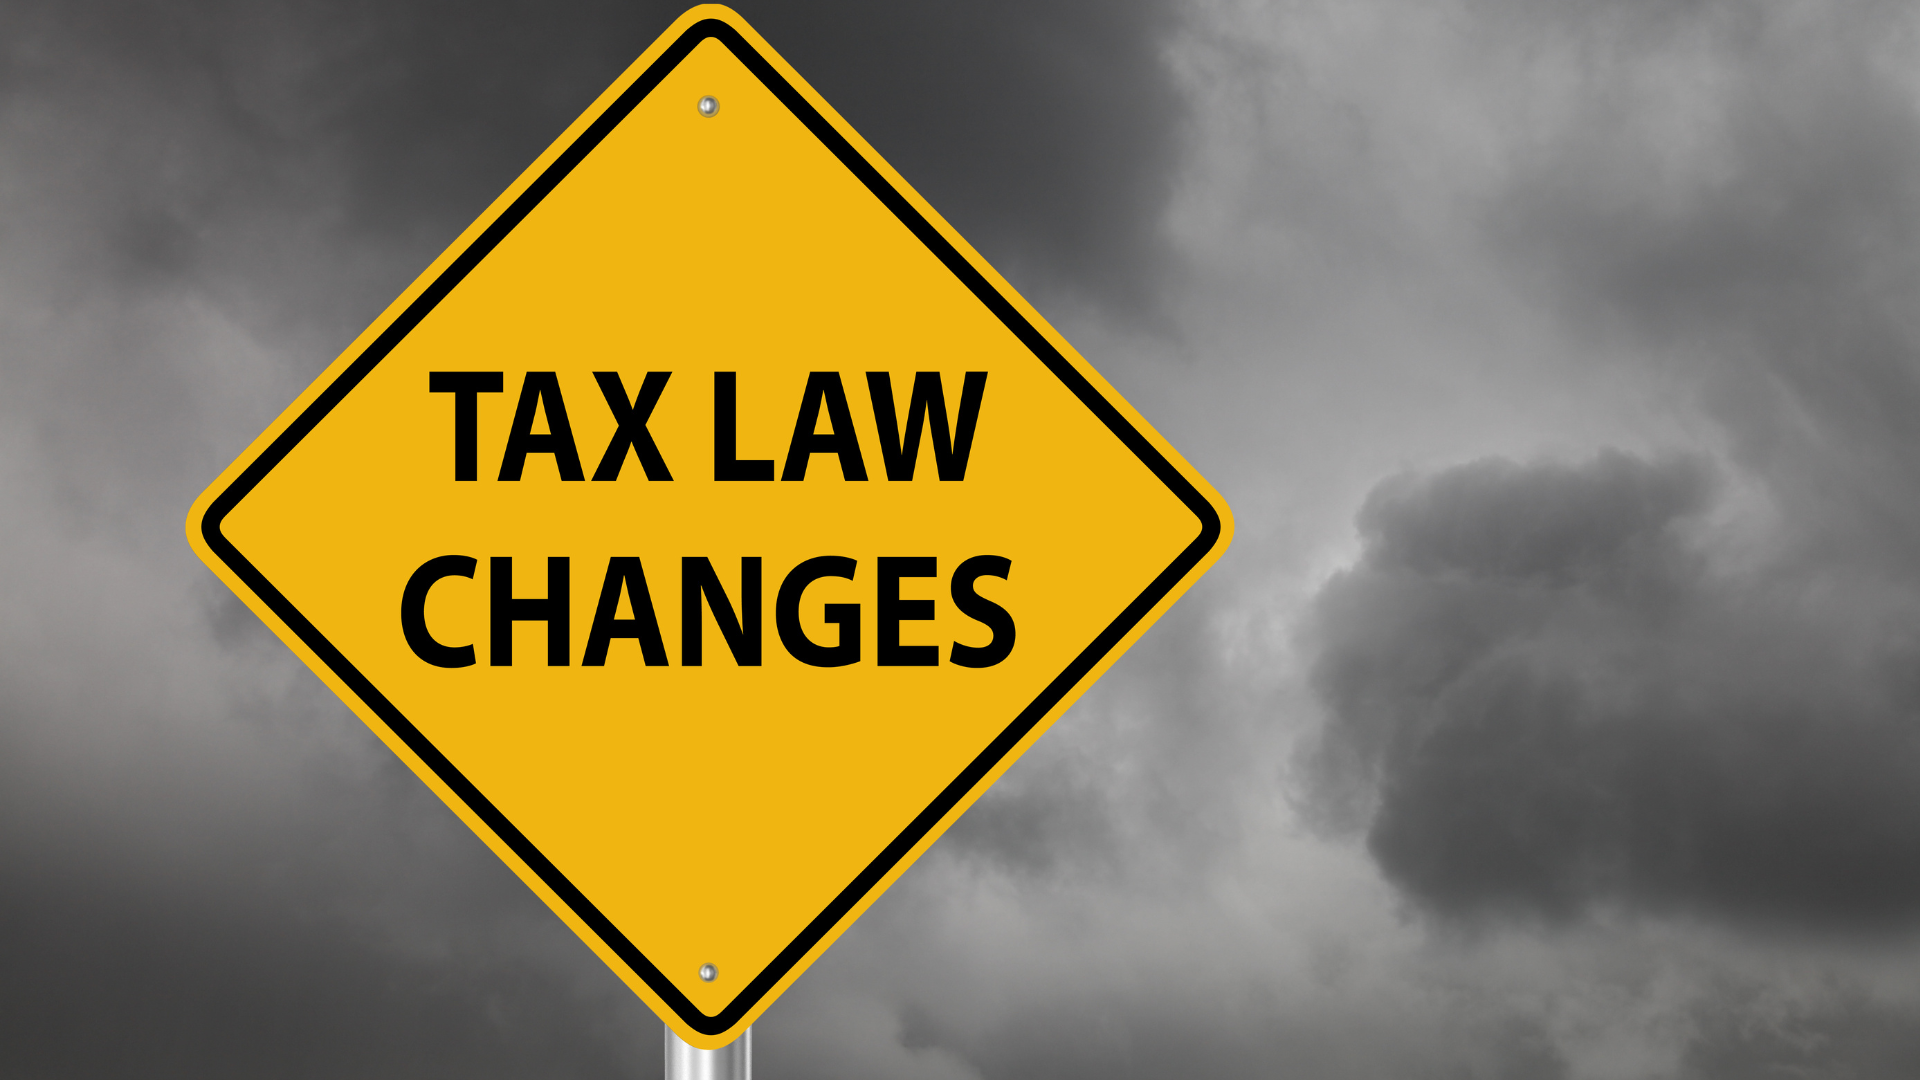 Domicile and tax: All change?